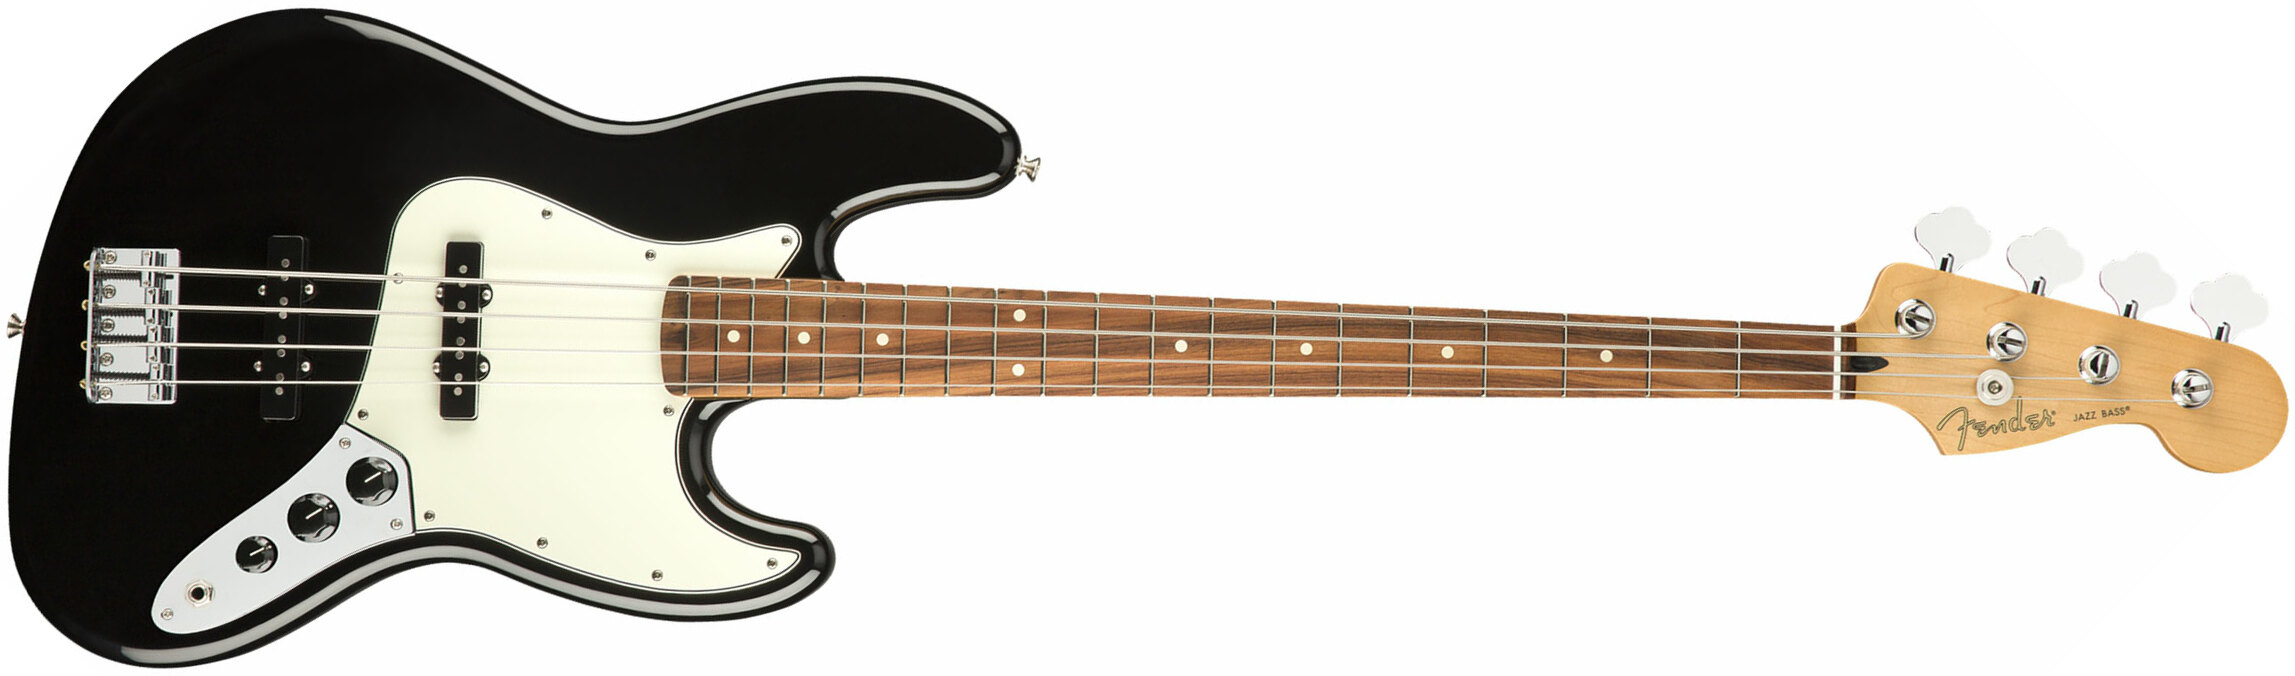 Fender Jazz Bass Player Mex Pf - Black - Solid body electric bass - Main picture